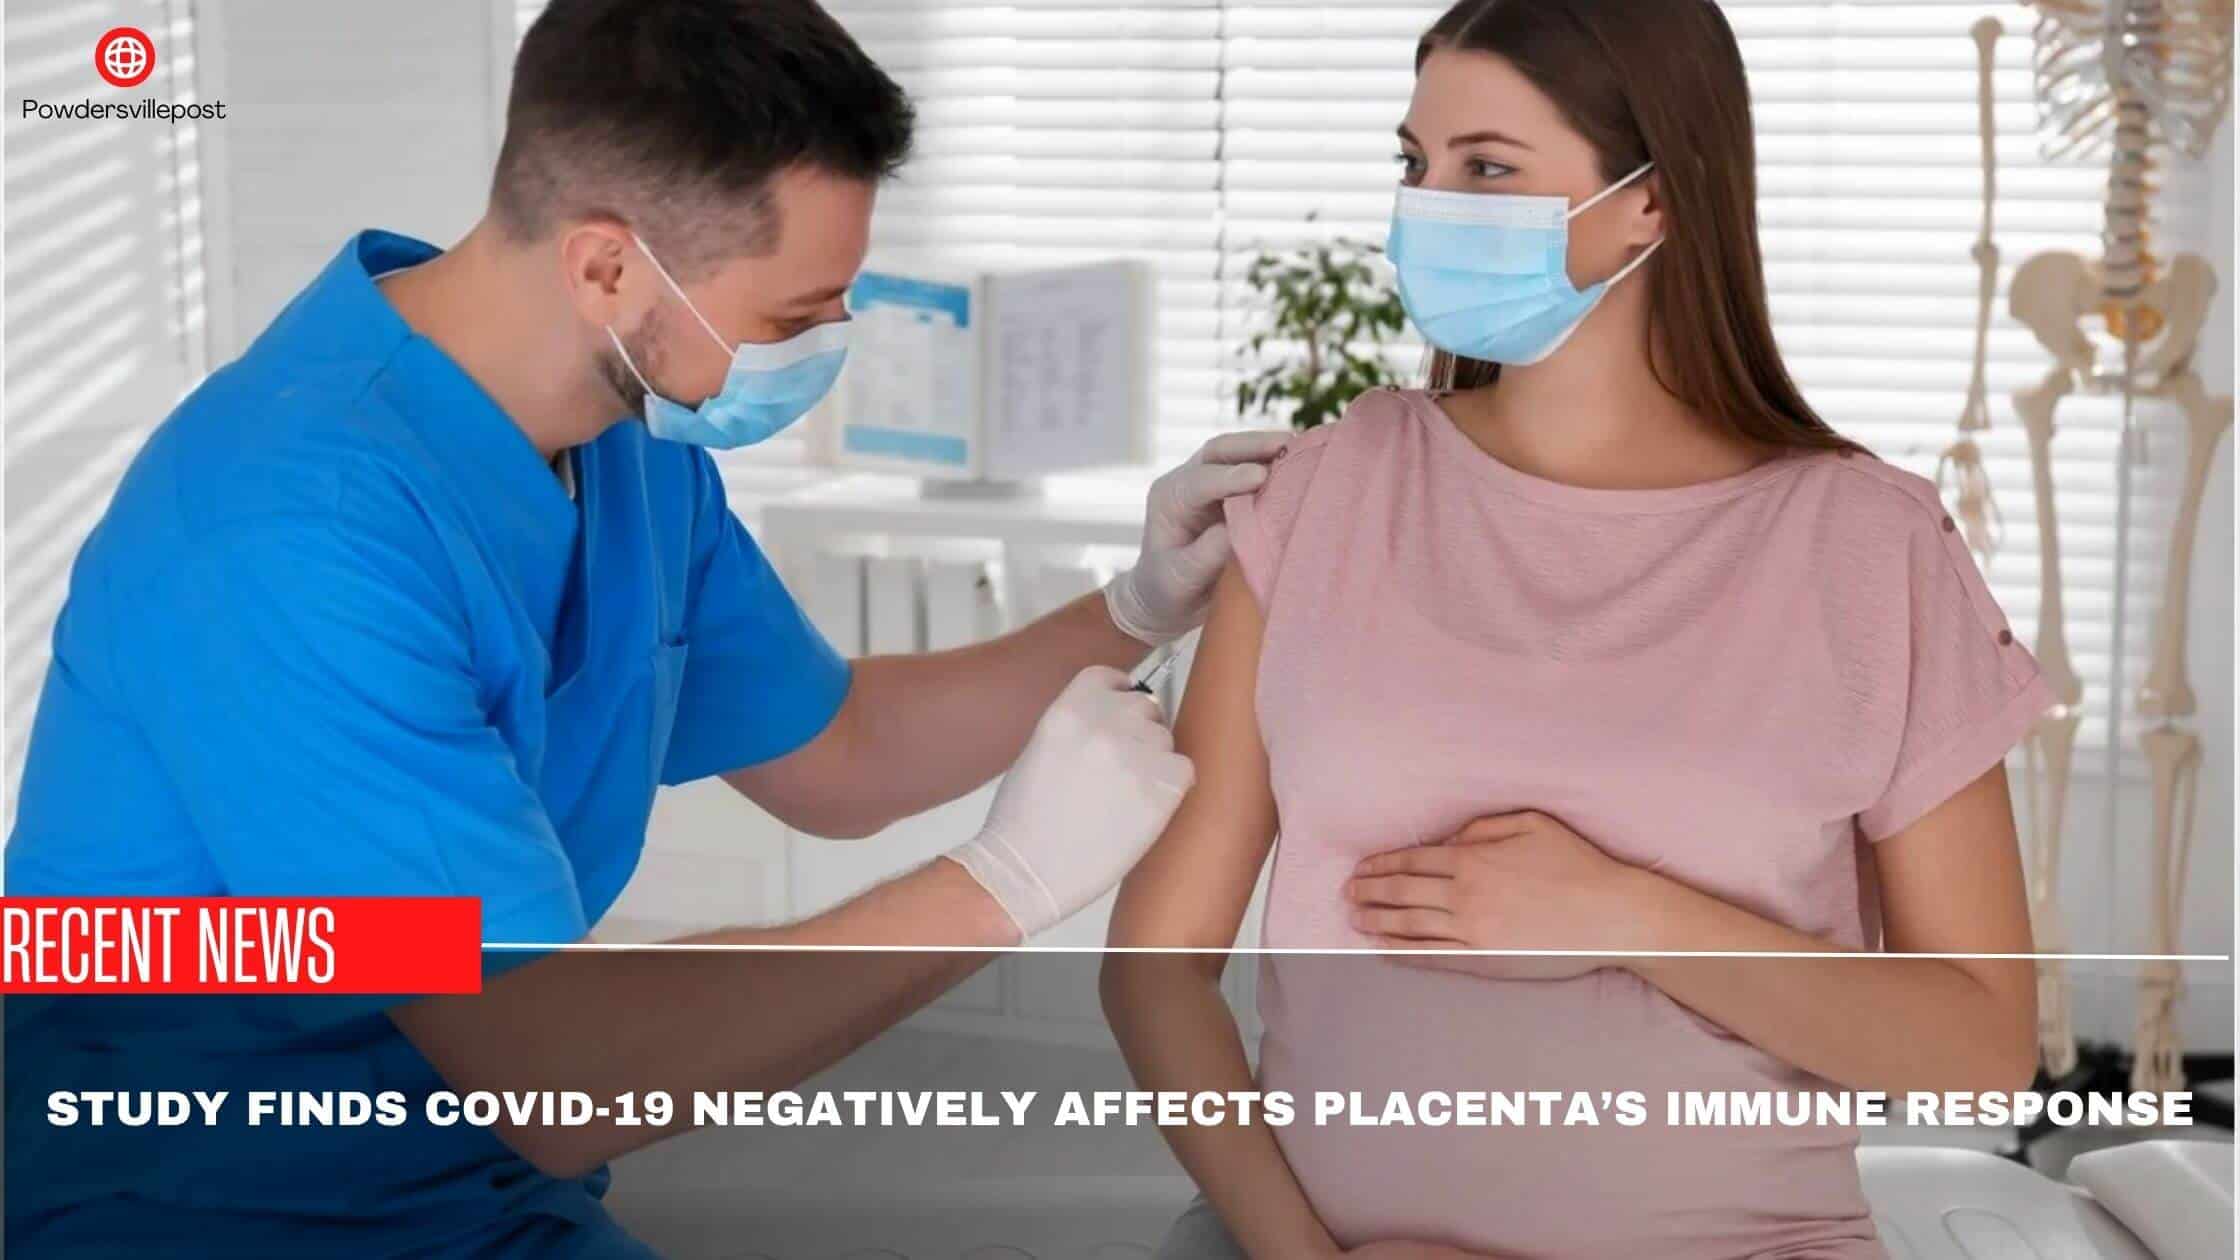 Study Finds Covid-19 Negatively Affects Placenta’s Immune Response